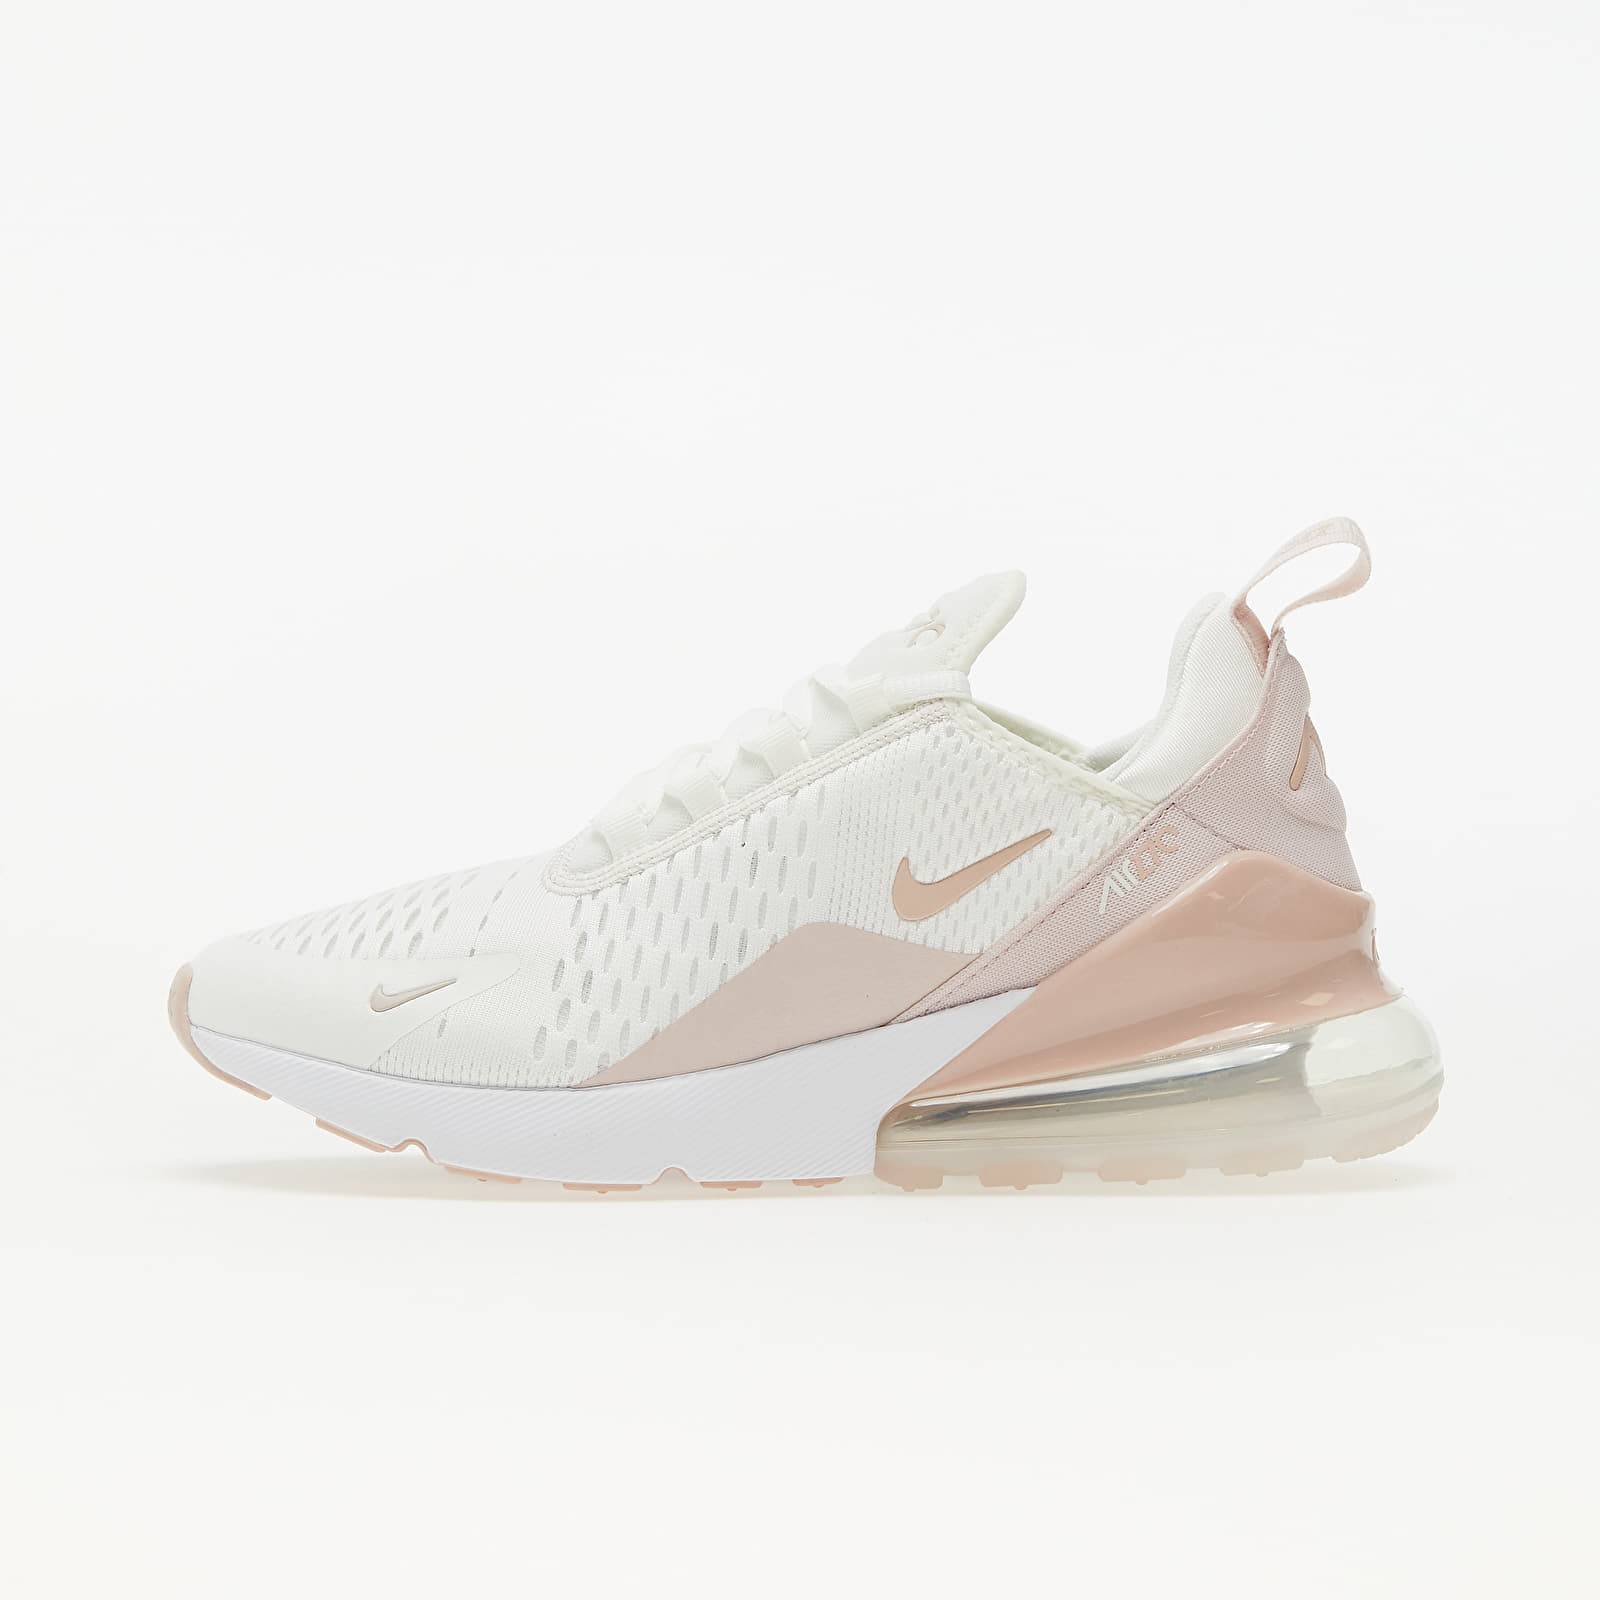 Nike Wmns Air Max 270 Essential Summit White/ Pink Oxford-Barely Rose DM3053-100